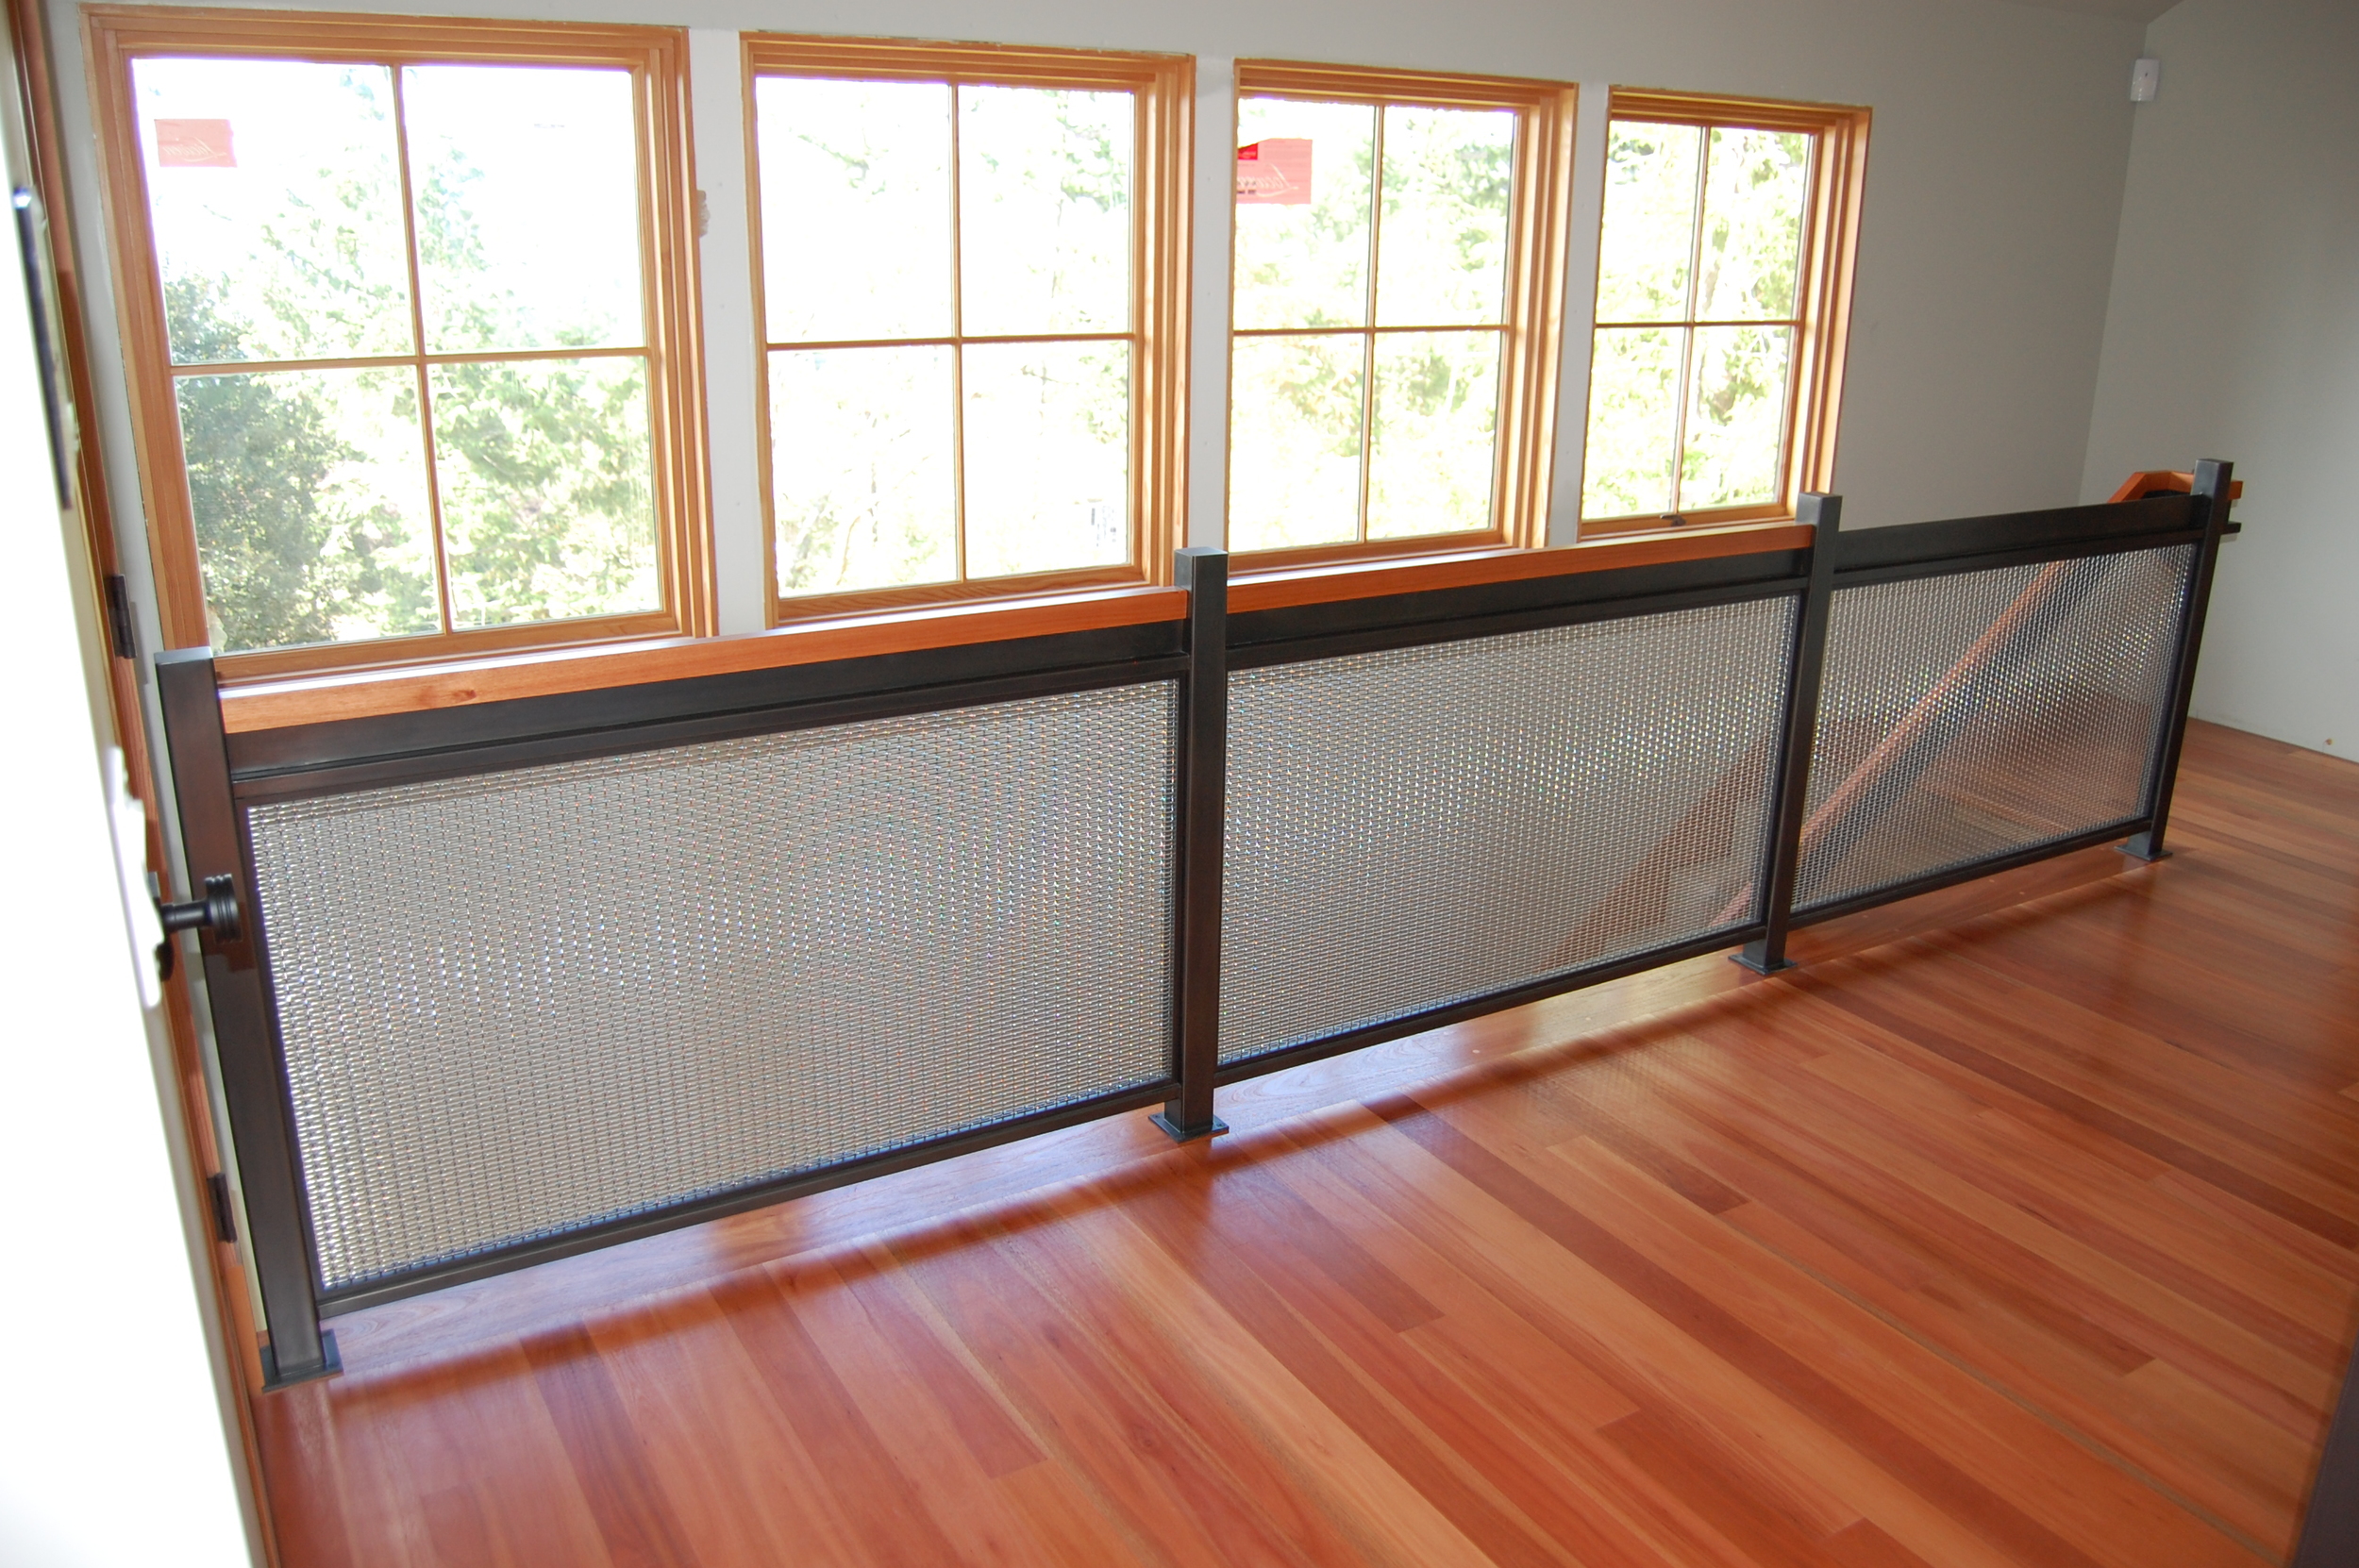  Blackened Steel Railing with Stainless Steel woven wire mesh  Designed by Formed Objects 